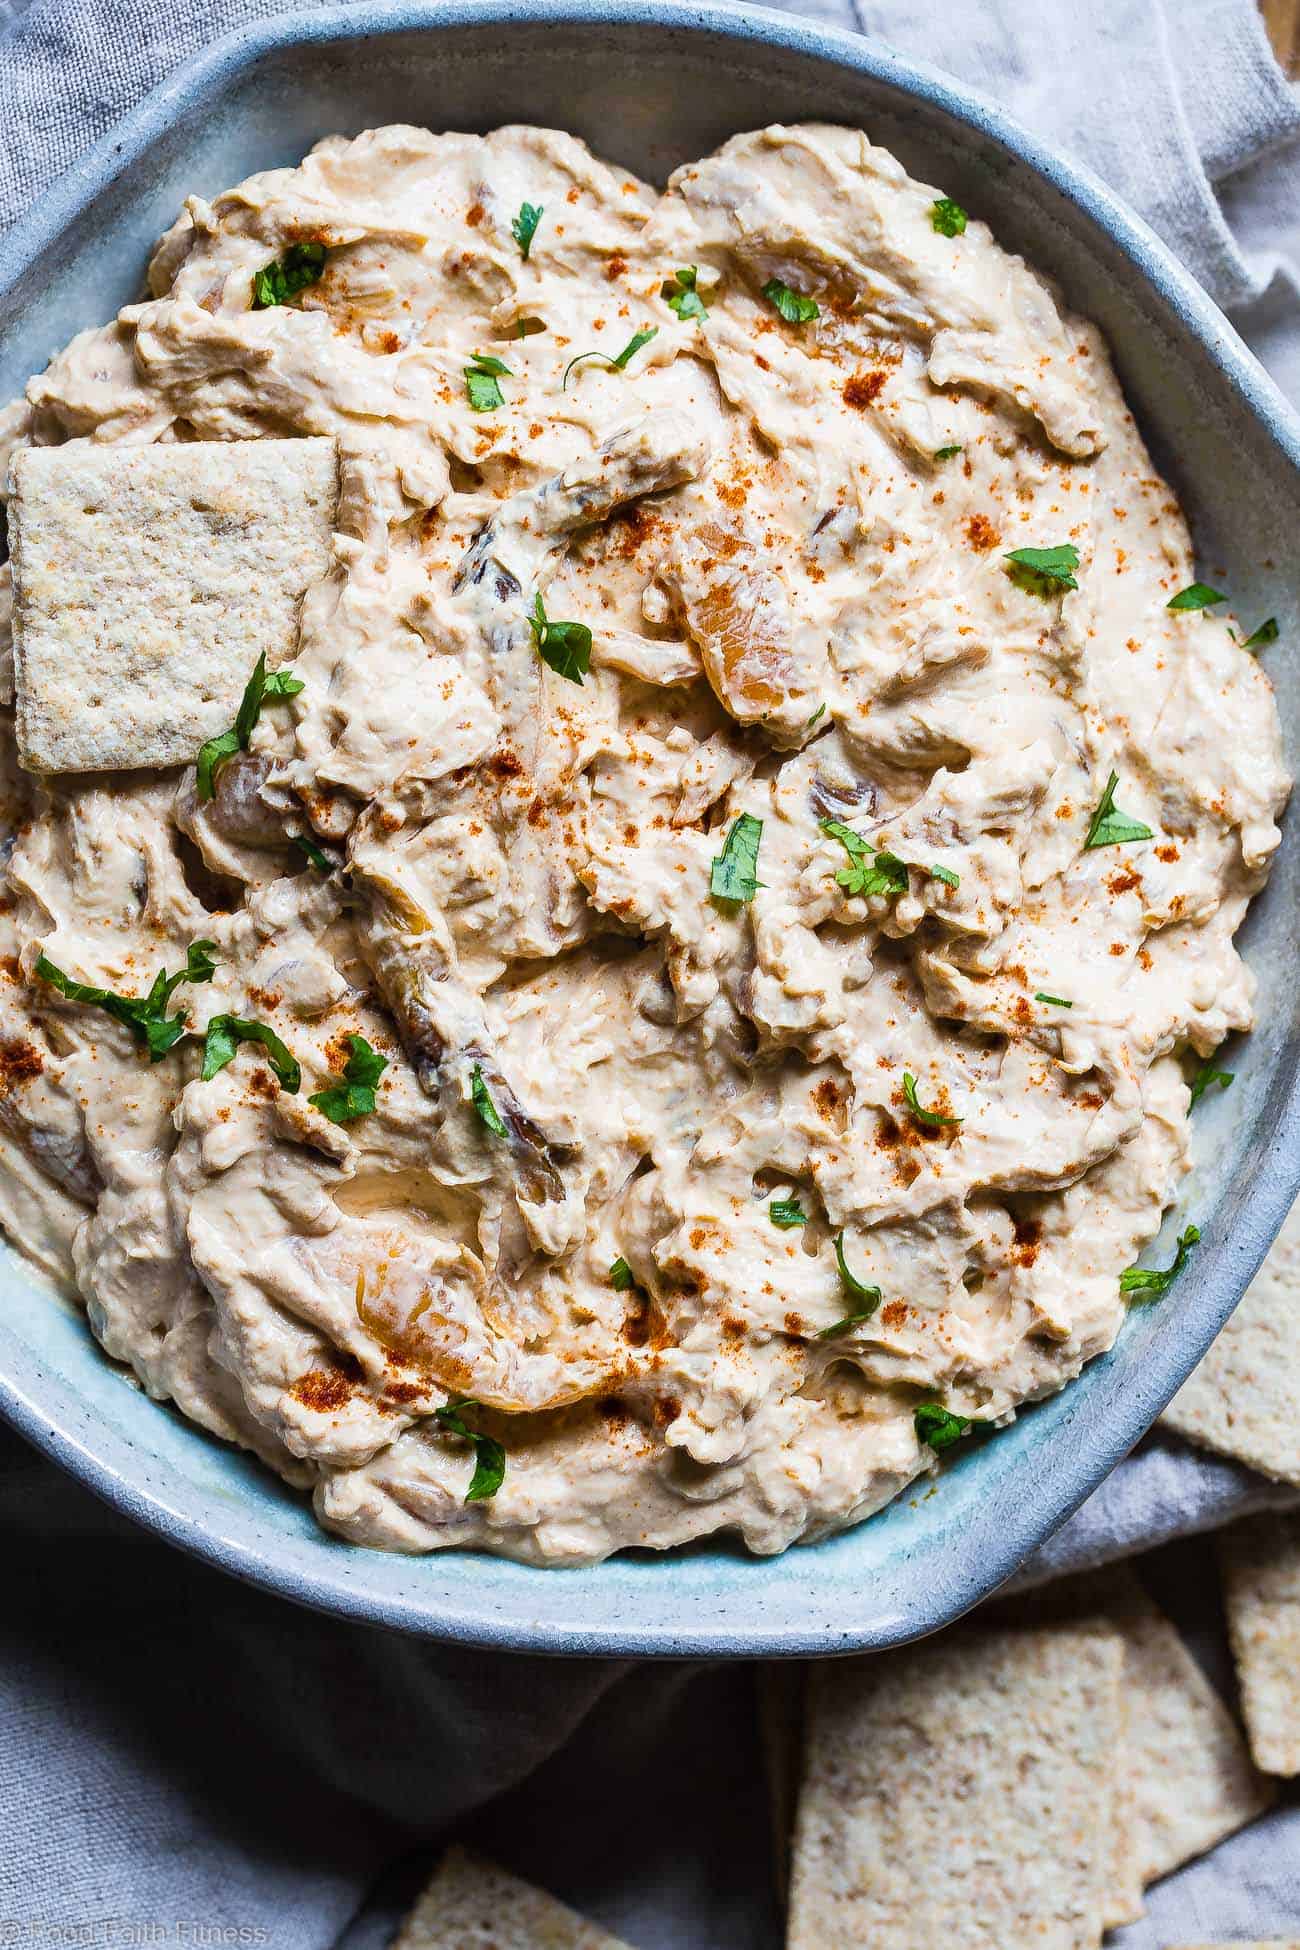 Easy Greek Yogurt French Onion Dip - This quick and easy French onion dip is a healthy, low carb, gluten free and protein packed appetizer that is perfect for parties! Only 110 calories and so creamy! | Foodfaithfitness.com | @FoodFaithFit